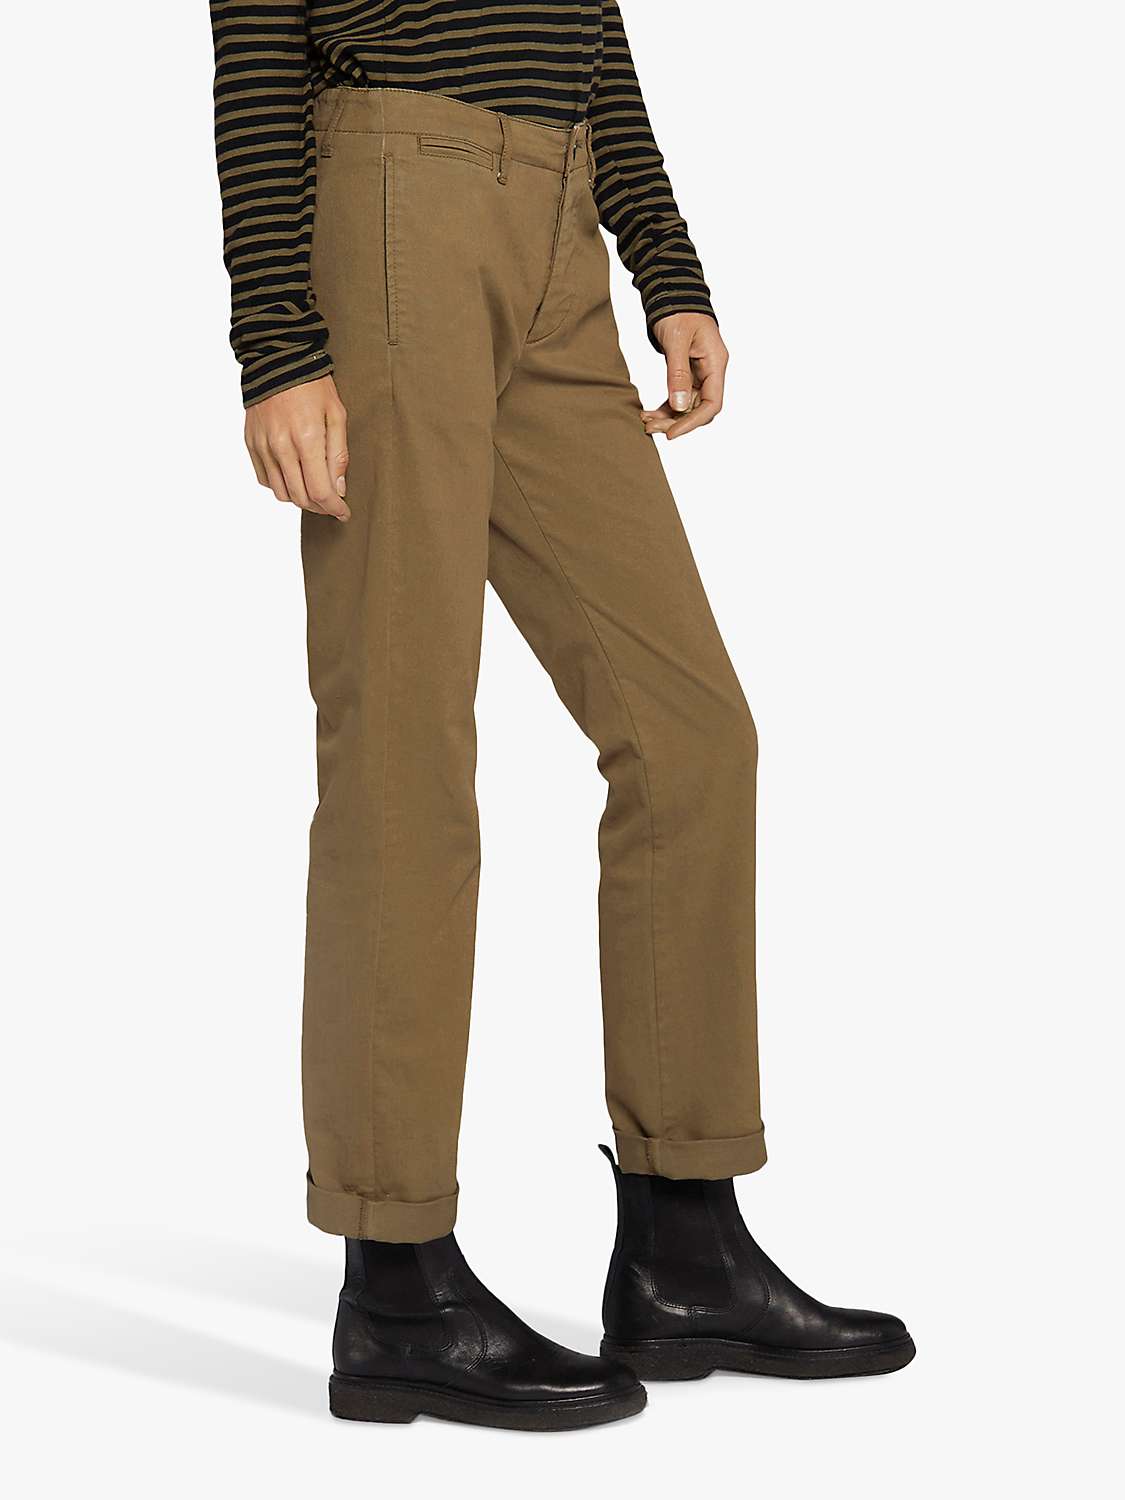 Buy Current/Elliott The Captain Chino Trousers Online at johnlewis.com